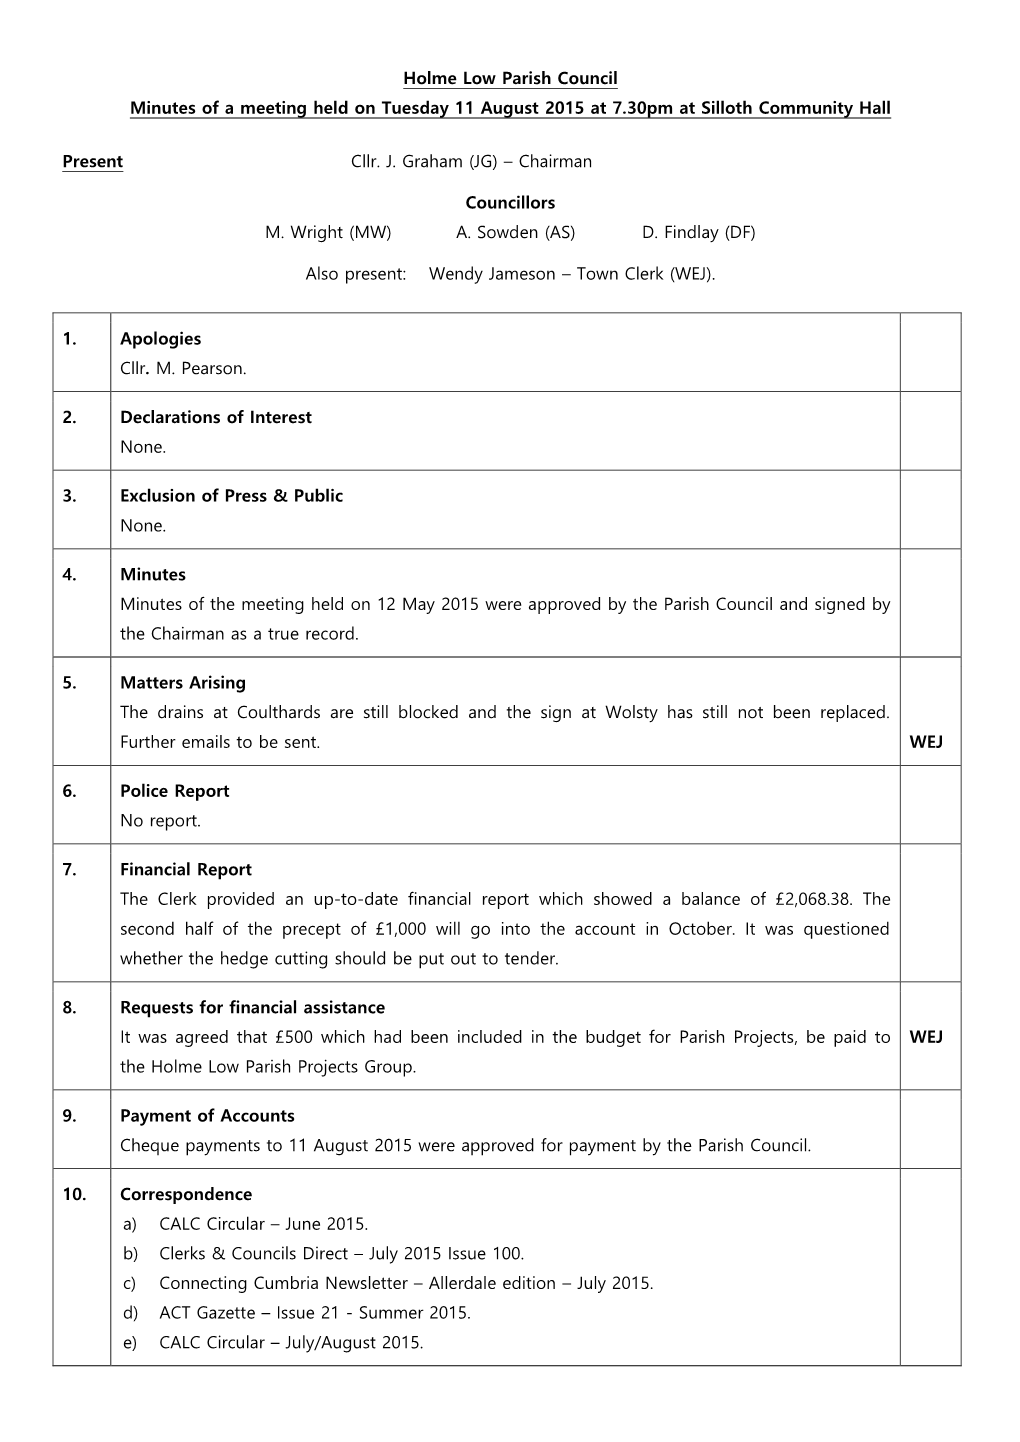 Minutes of a Meeting of Holme Low Parish Council – 11 August 2015